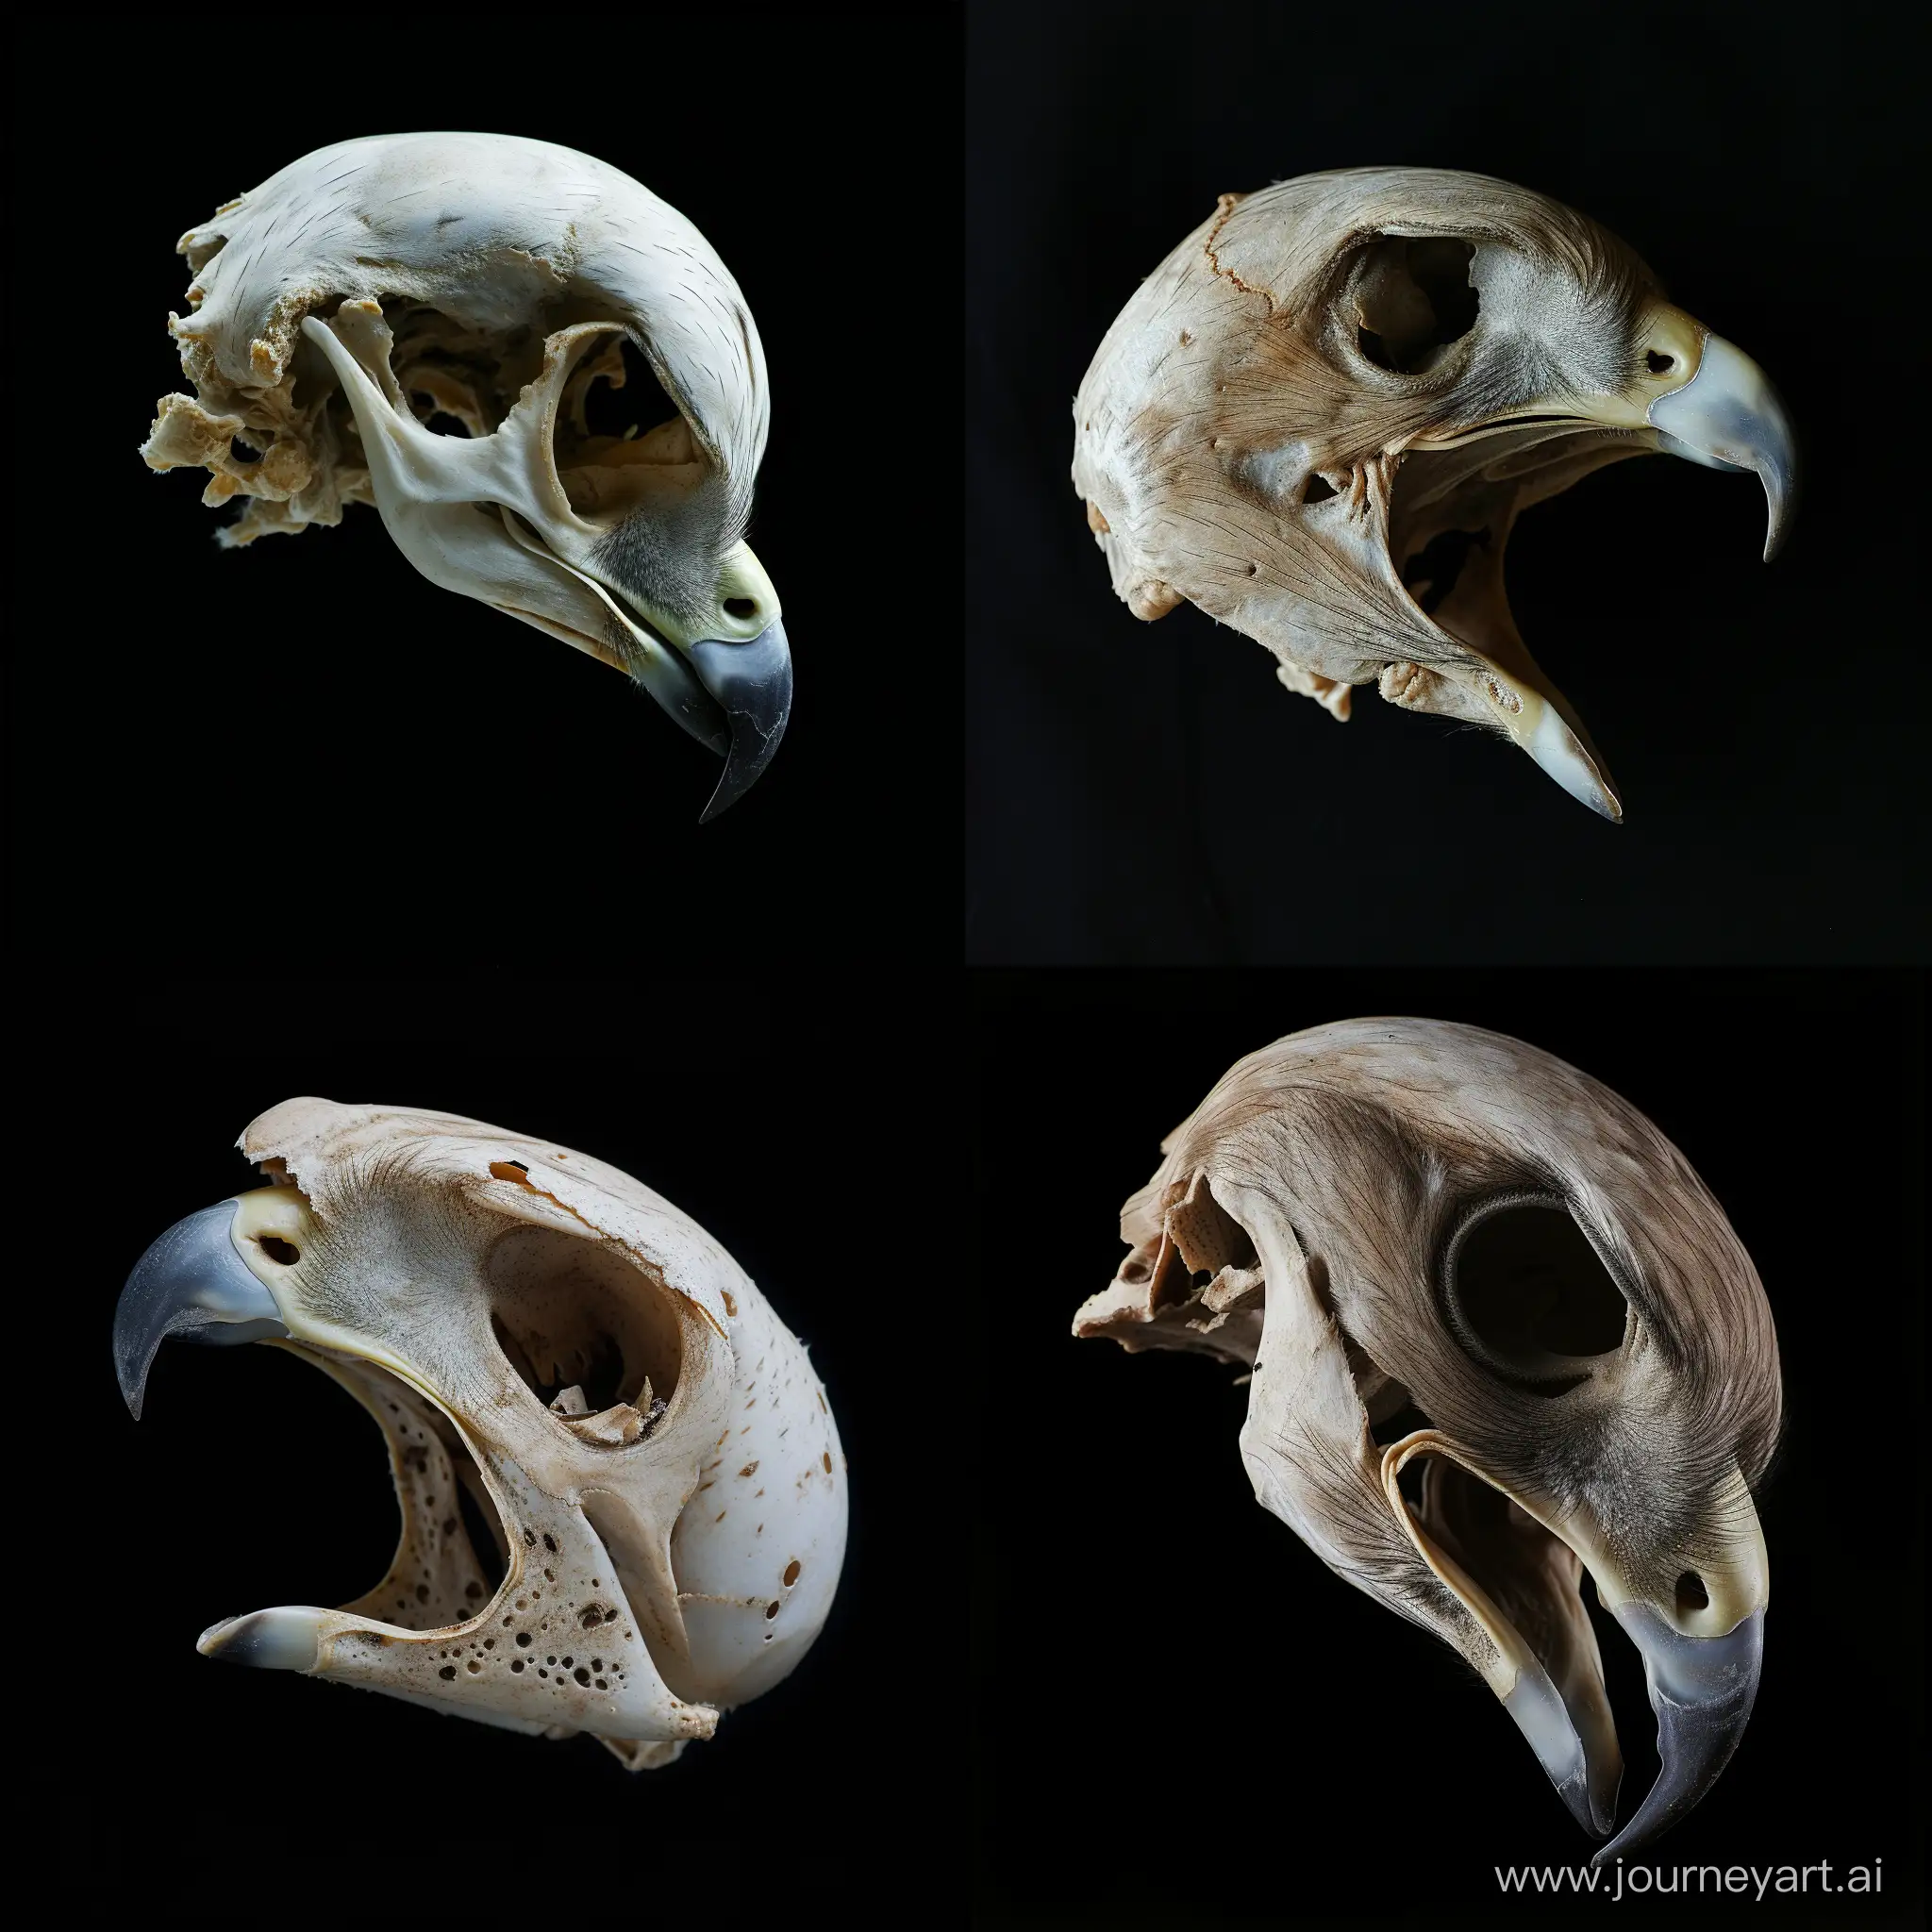 Ethereal-Hawk-Skull-Captured-in-Mesmerizing-34-Angle-Photograph